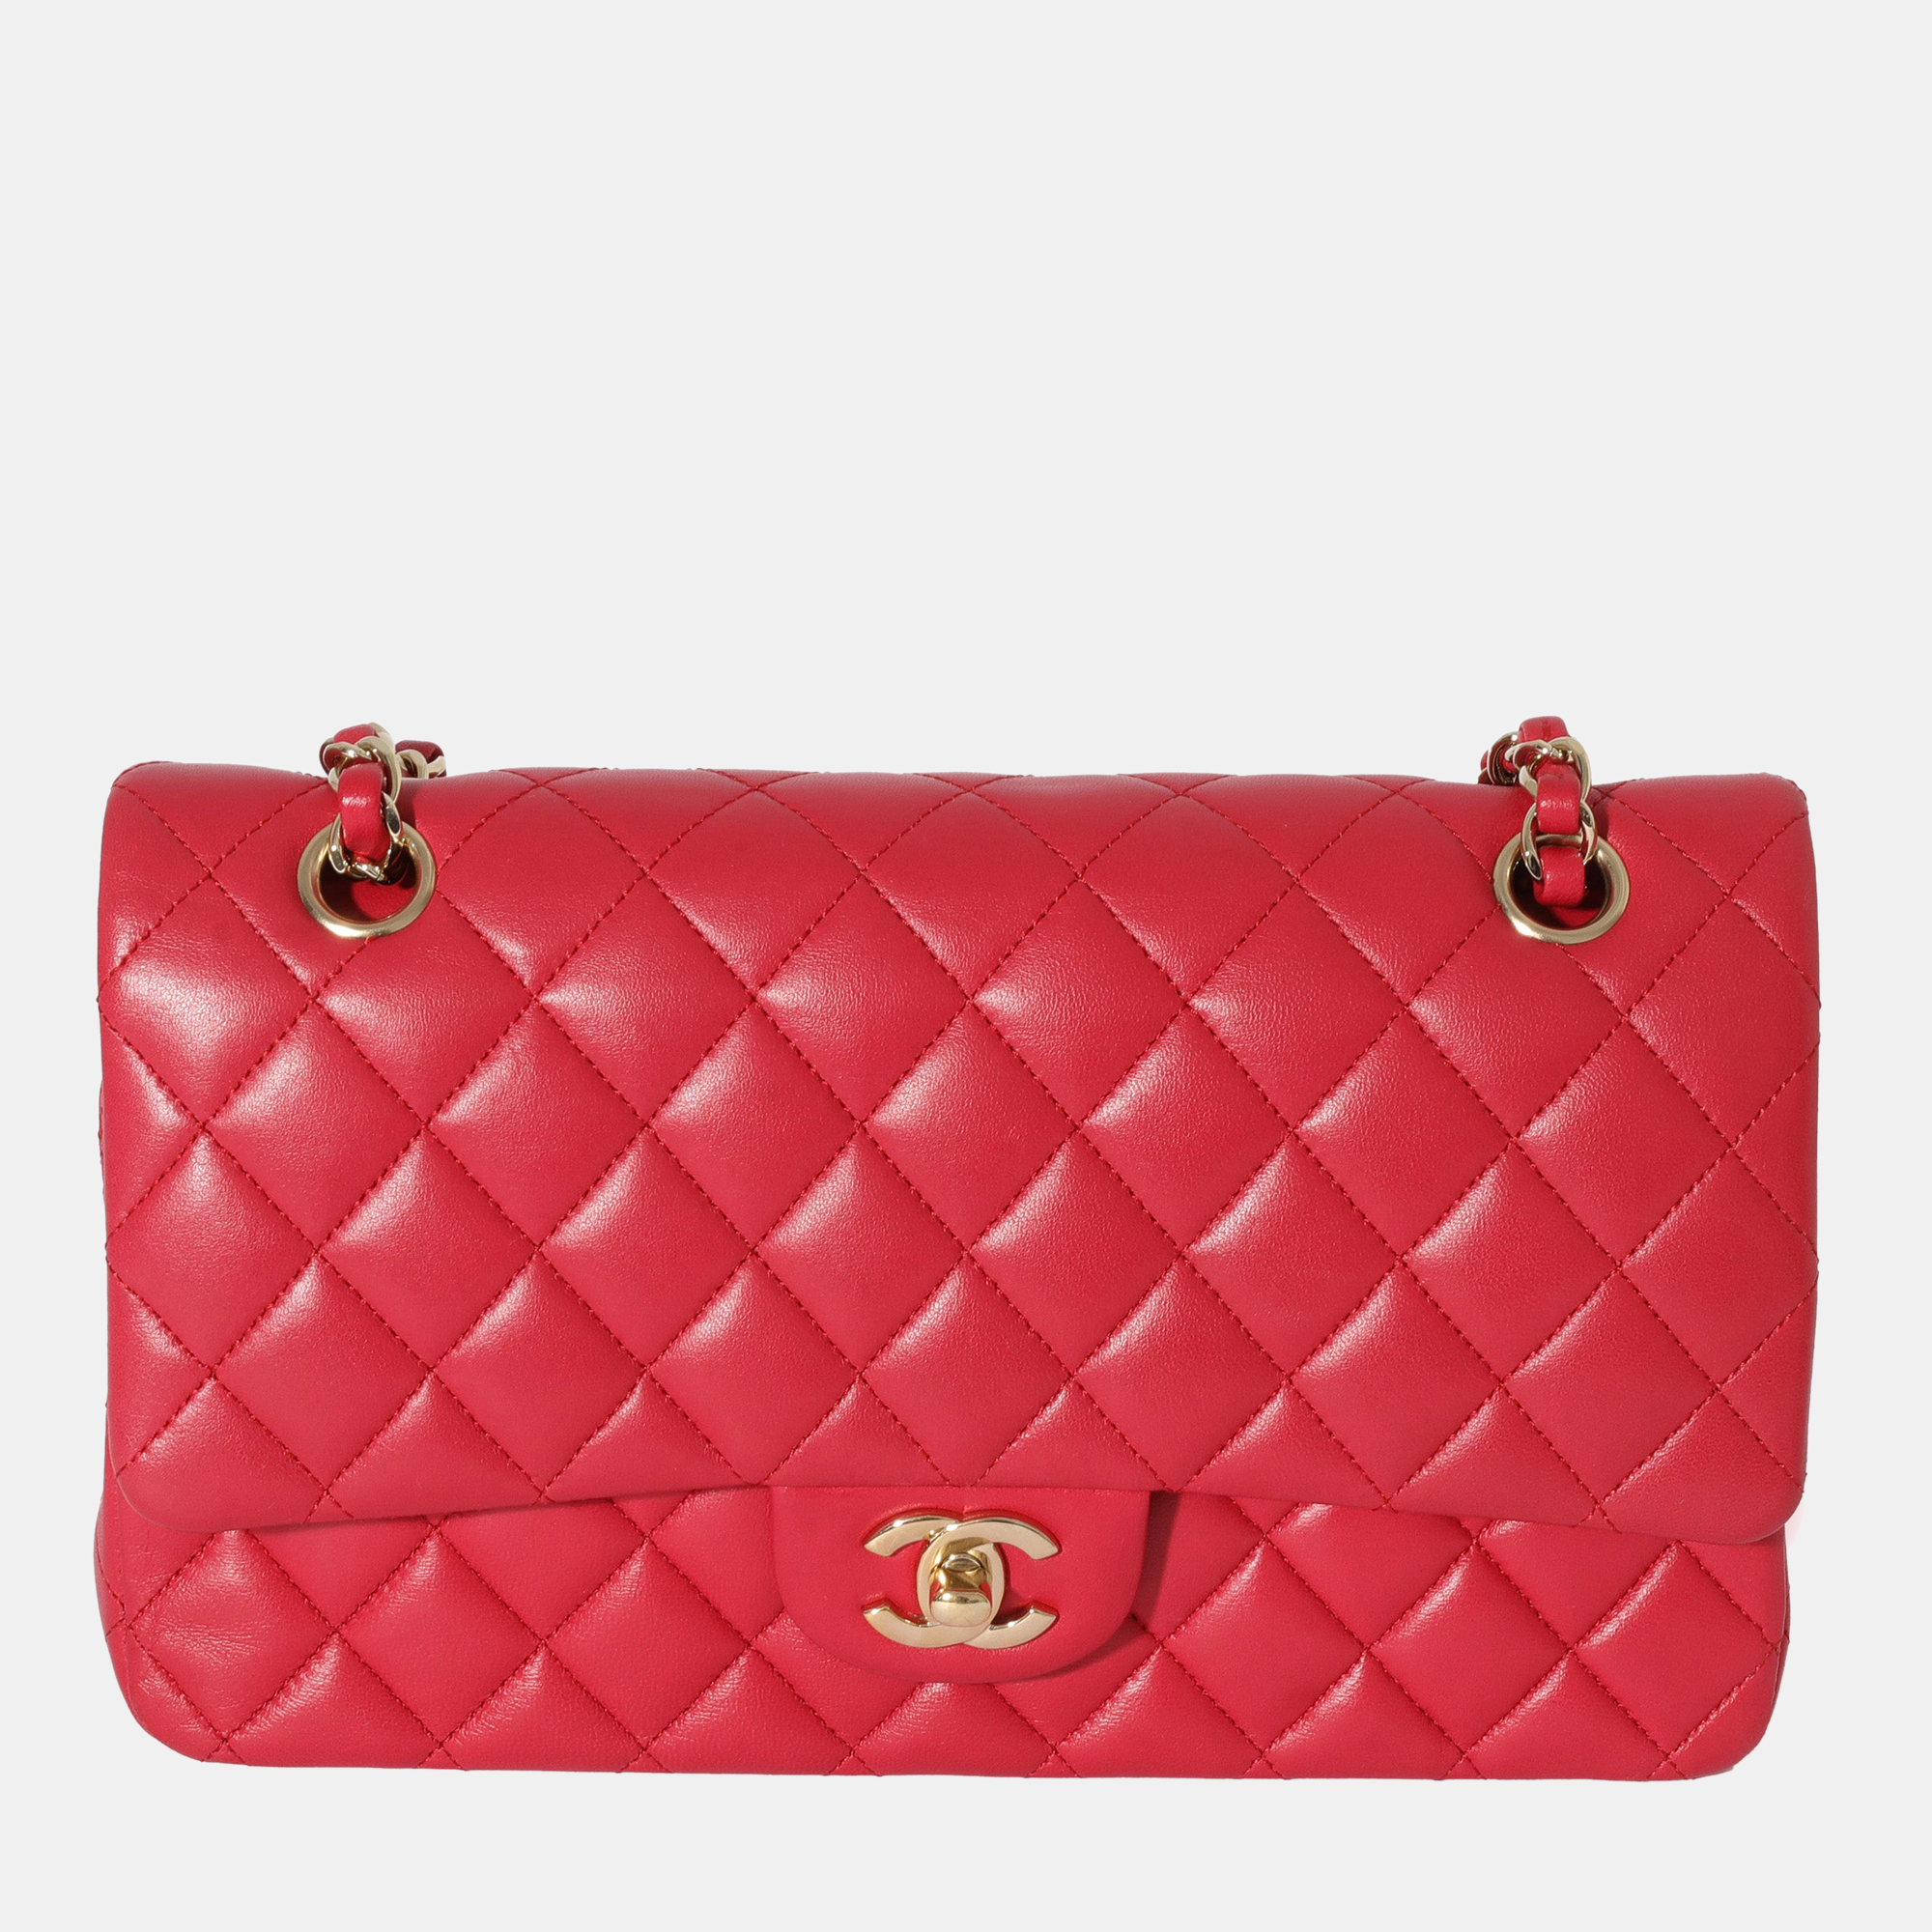 Chanel red quilted leather medium classic double flap shoulder bag